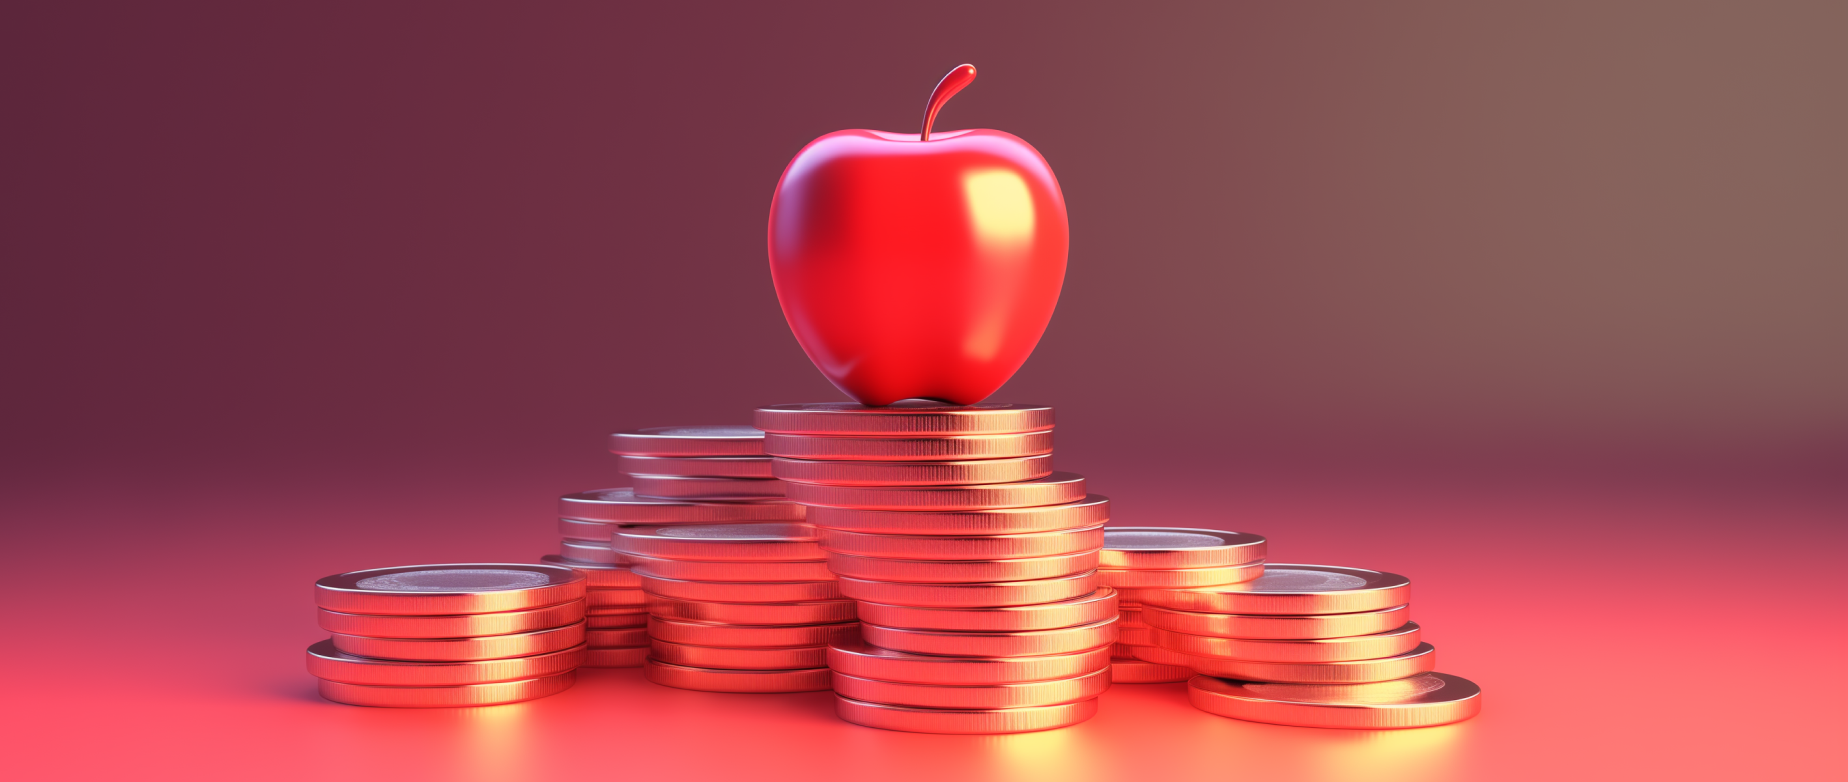 A red apple on a stack of coins.